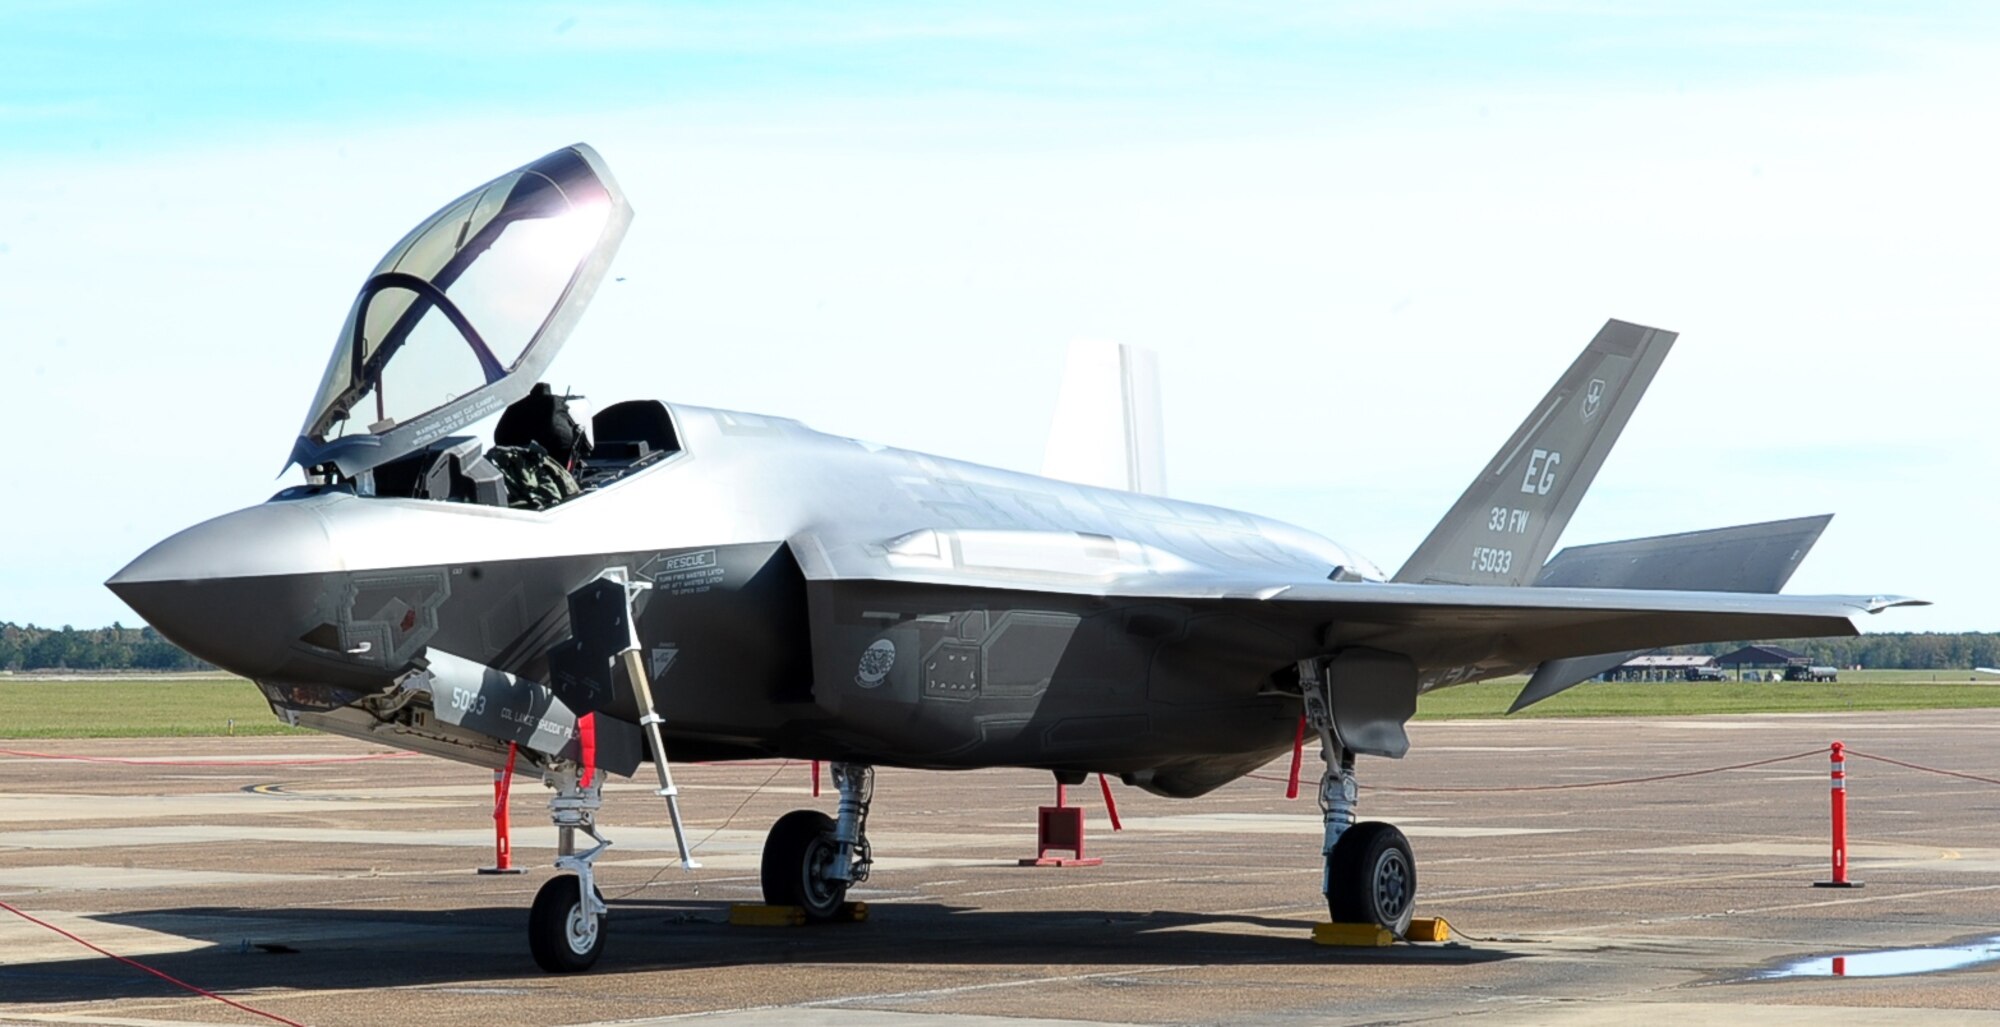 An F-35A Lightning II fighter aircraft from Eglin Air Force Base, Florida, sits on the flightline of Columbus AFB, Mississippi, Nov. 13. Two F-35 aircraft and their pilots visited Columbus to talk about the aircraft’s fighter capabilities with Team BLAZE Airmen and visiting Mississippi State University ROTC students. (U.S. Air Force photo/Senior Airman Kaleb Snay)